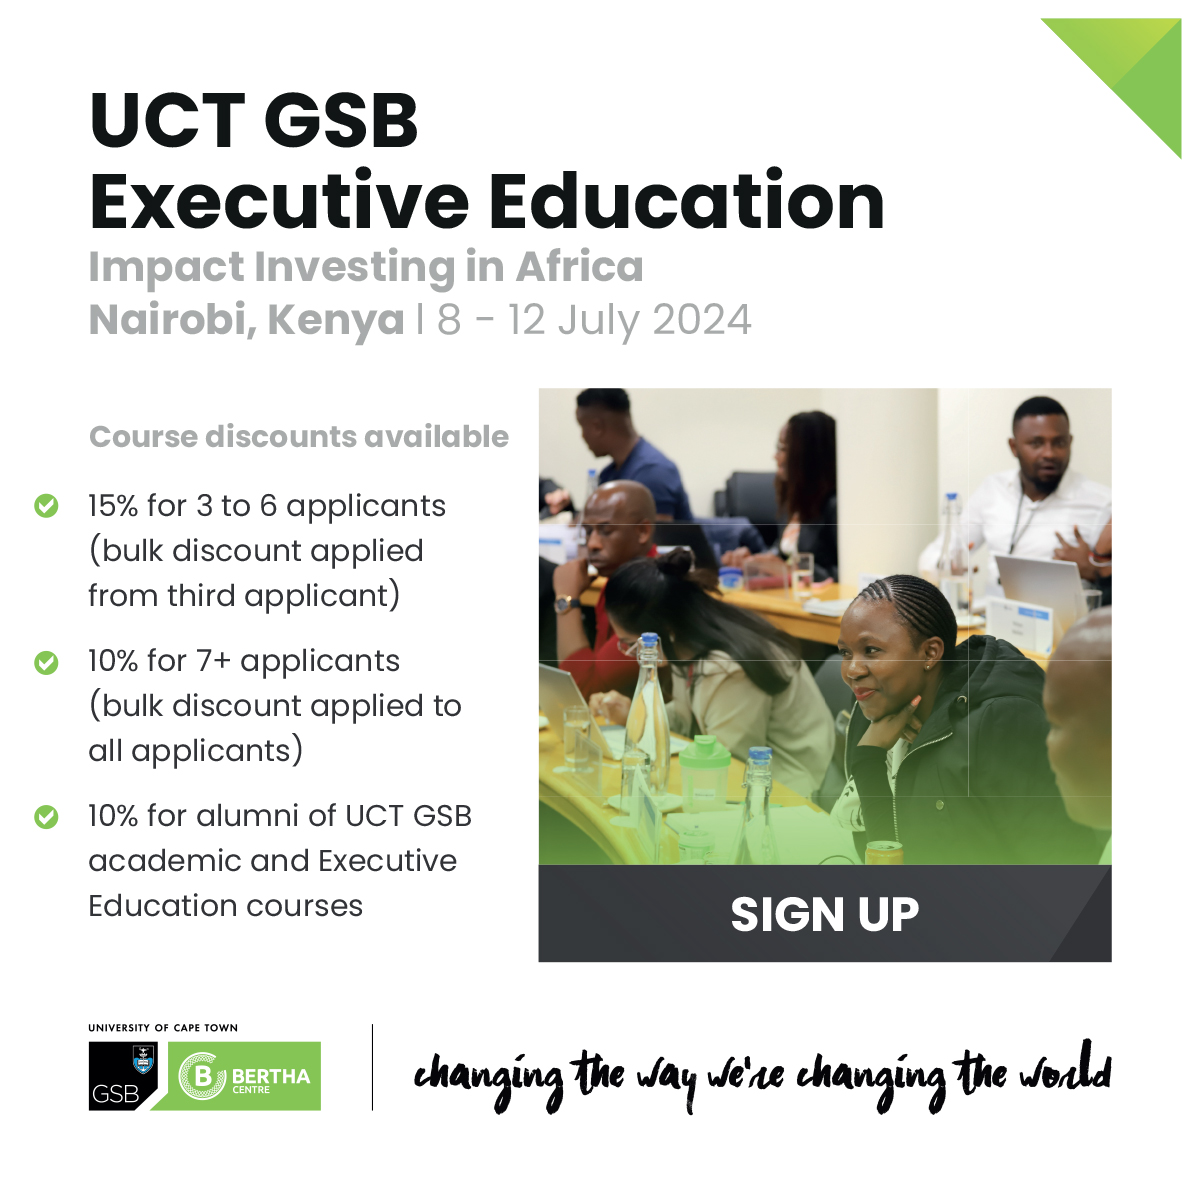 Course discounts are available for our upcoming 'Impact Investing in Africa' Executive Education course. Enquire here: bit.ly/3T6VNLl